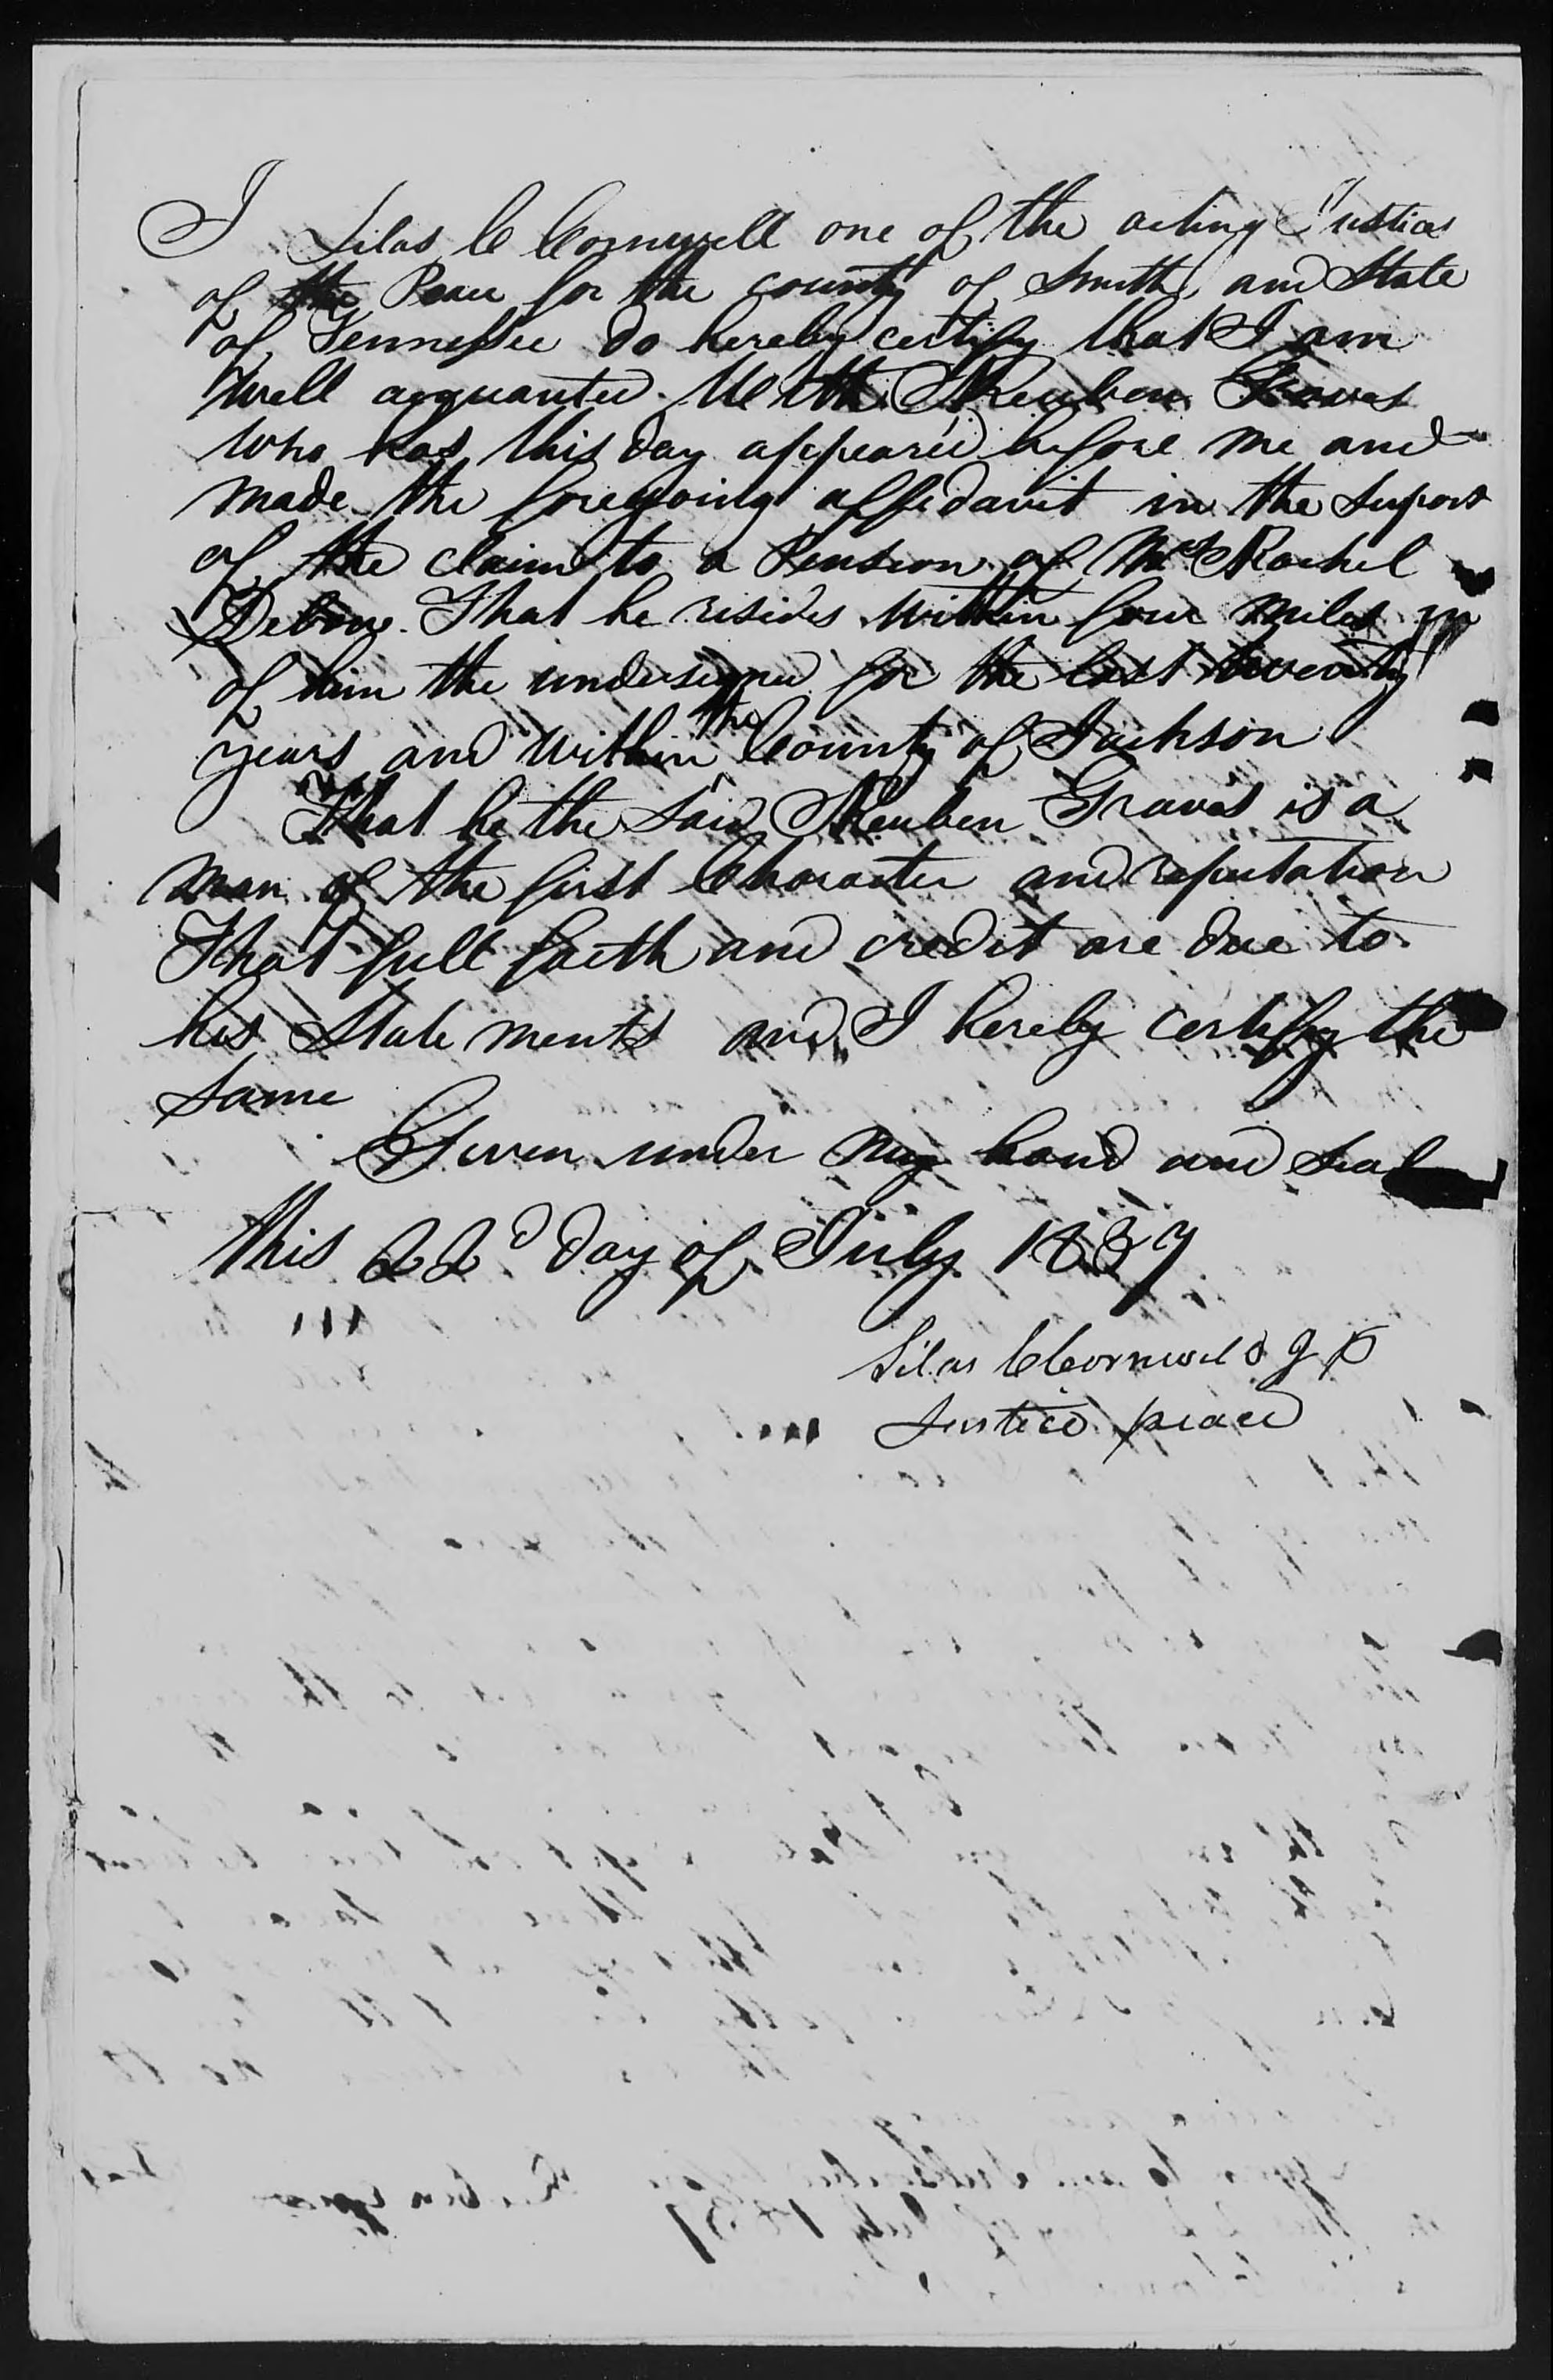 Affidavit of Reuben Graves in support of a Pension Claim for Rachel Debow, 22 July 1837, page 2